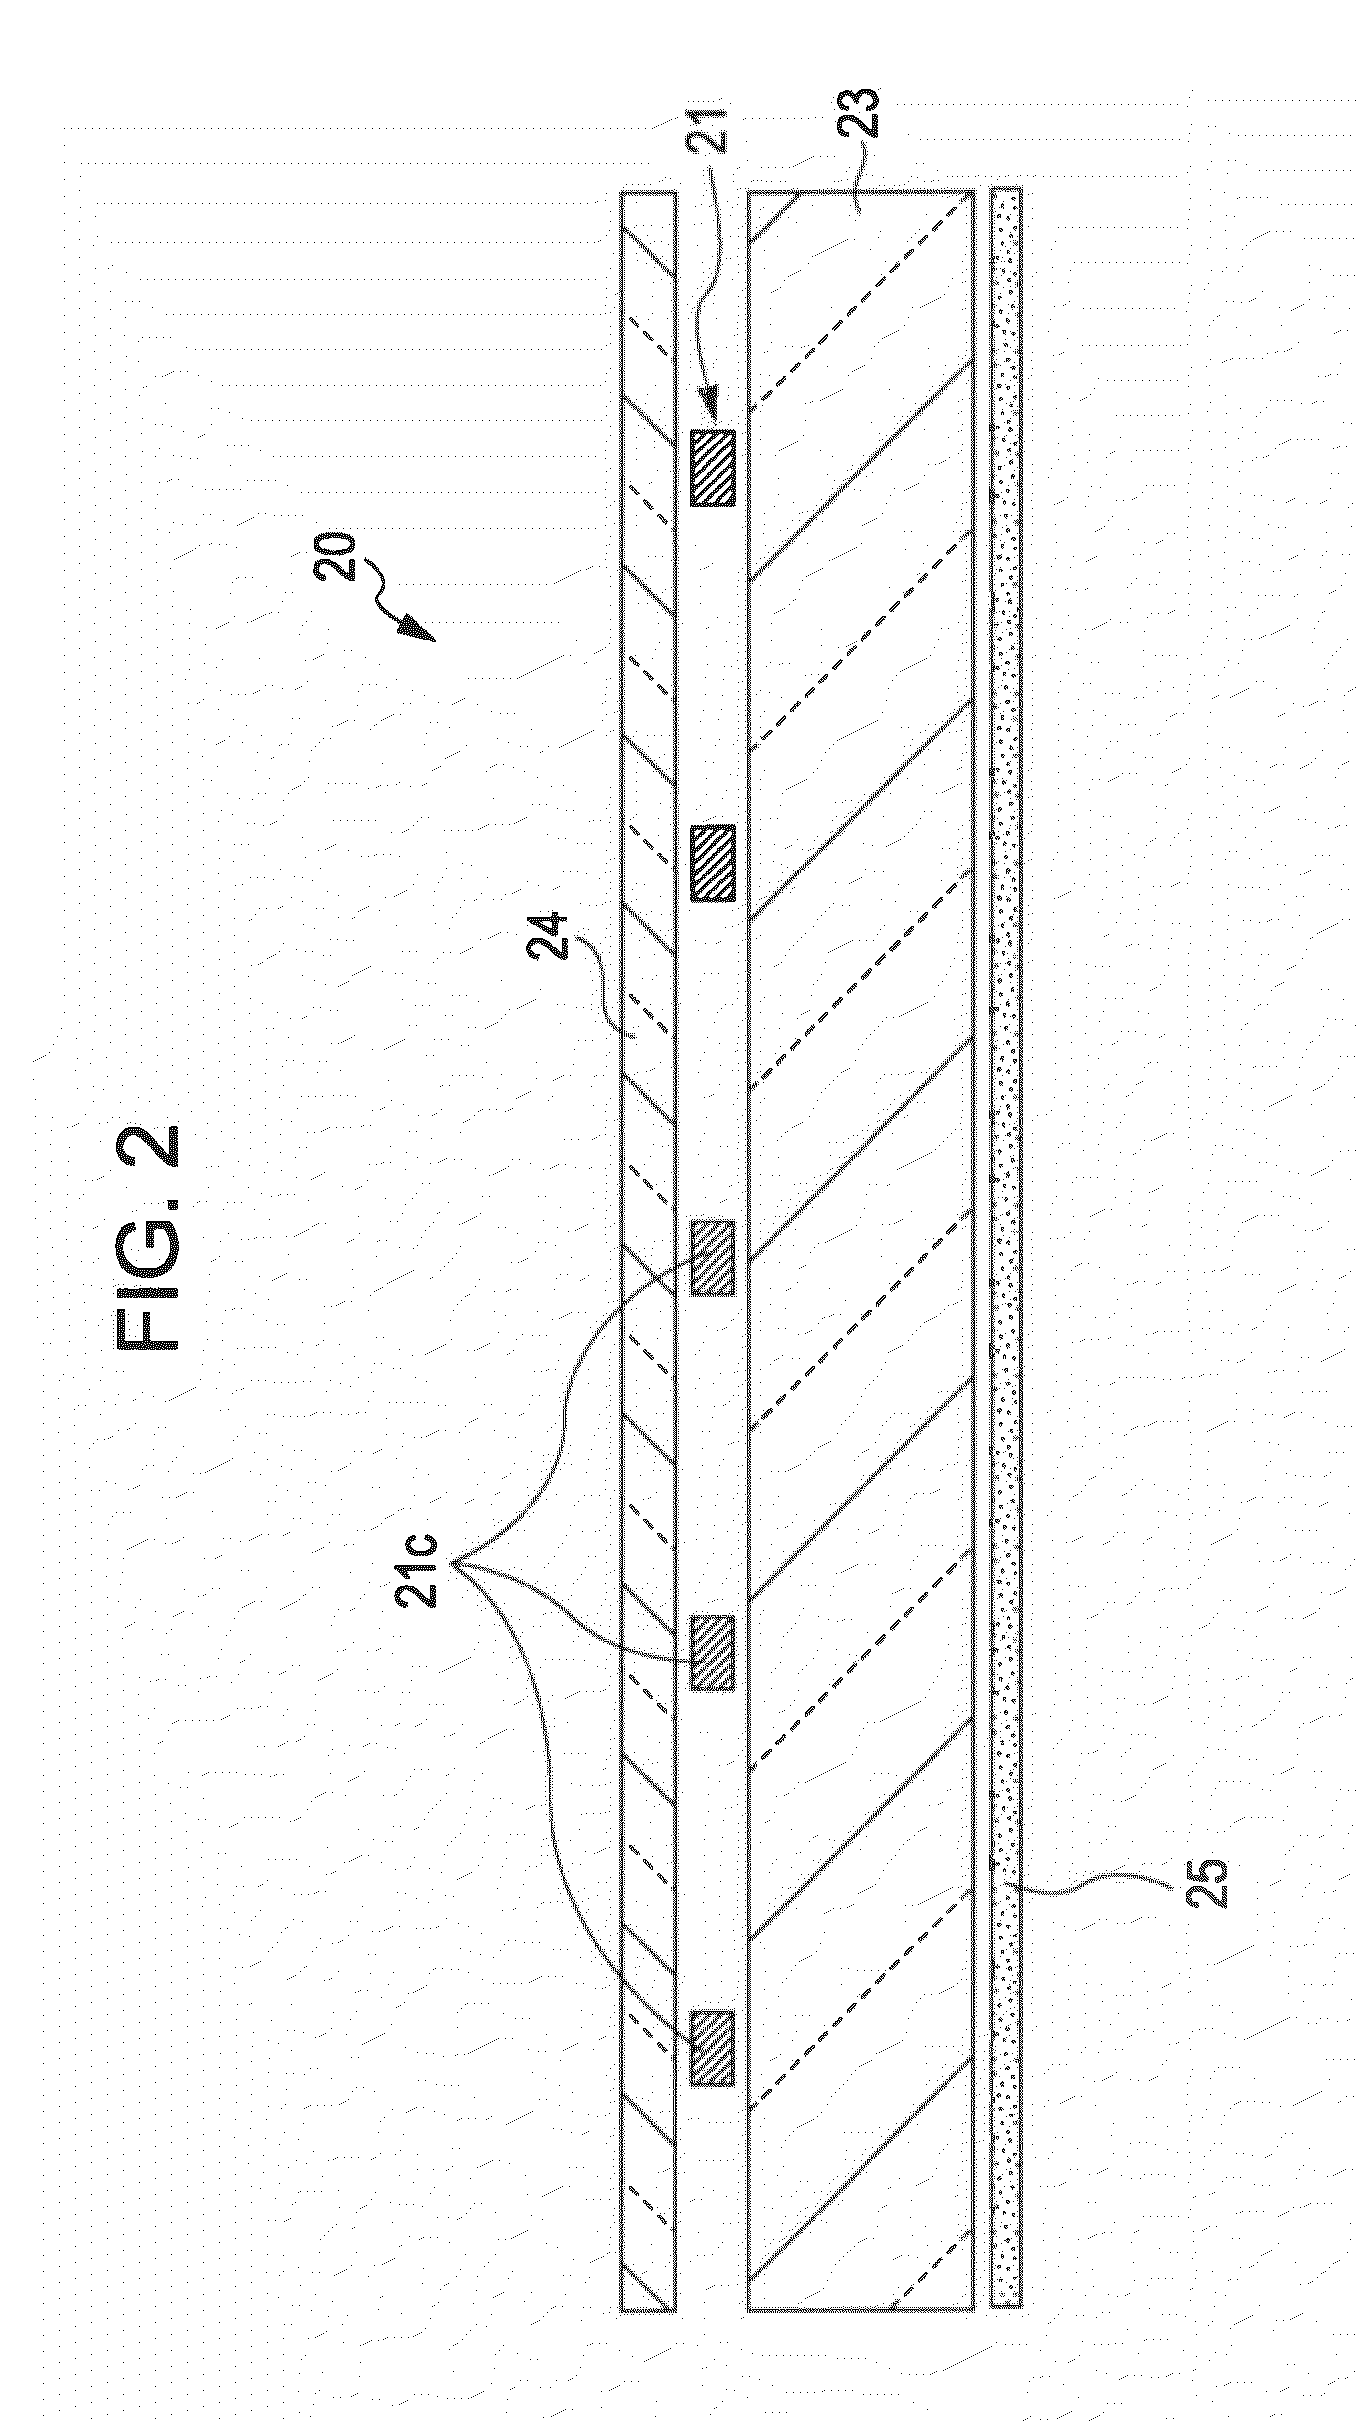 Antenna device and mobile device